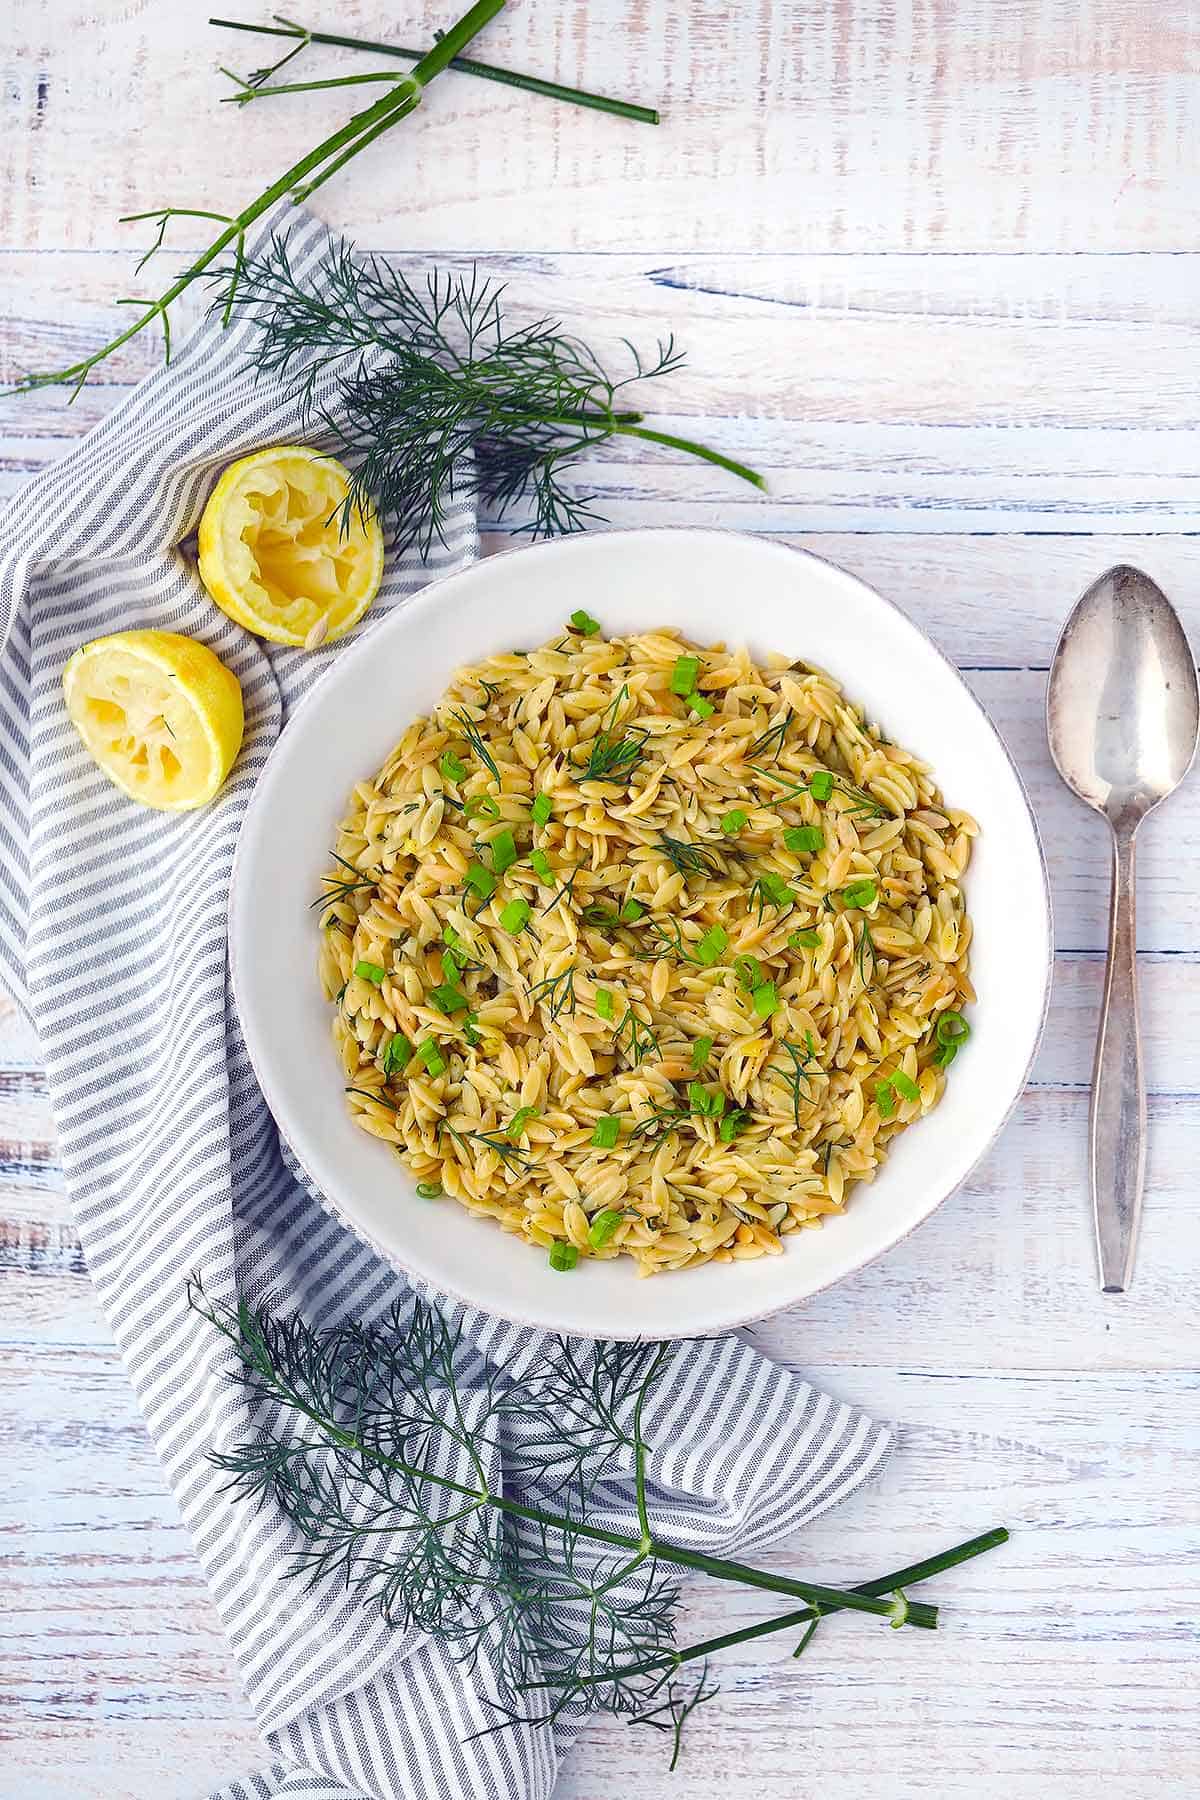 Flatlay photo of orzo pilaf with lemon and dill on the side.